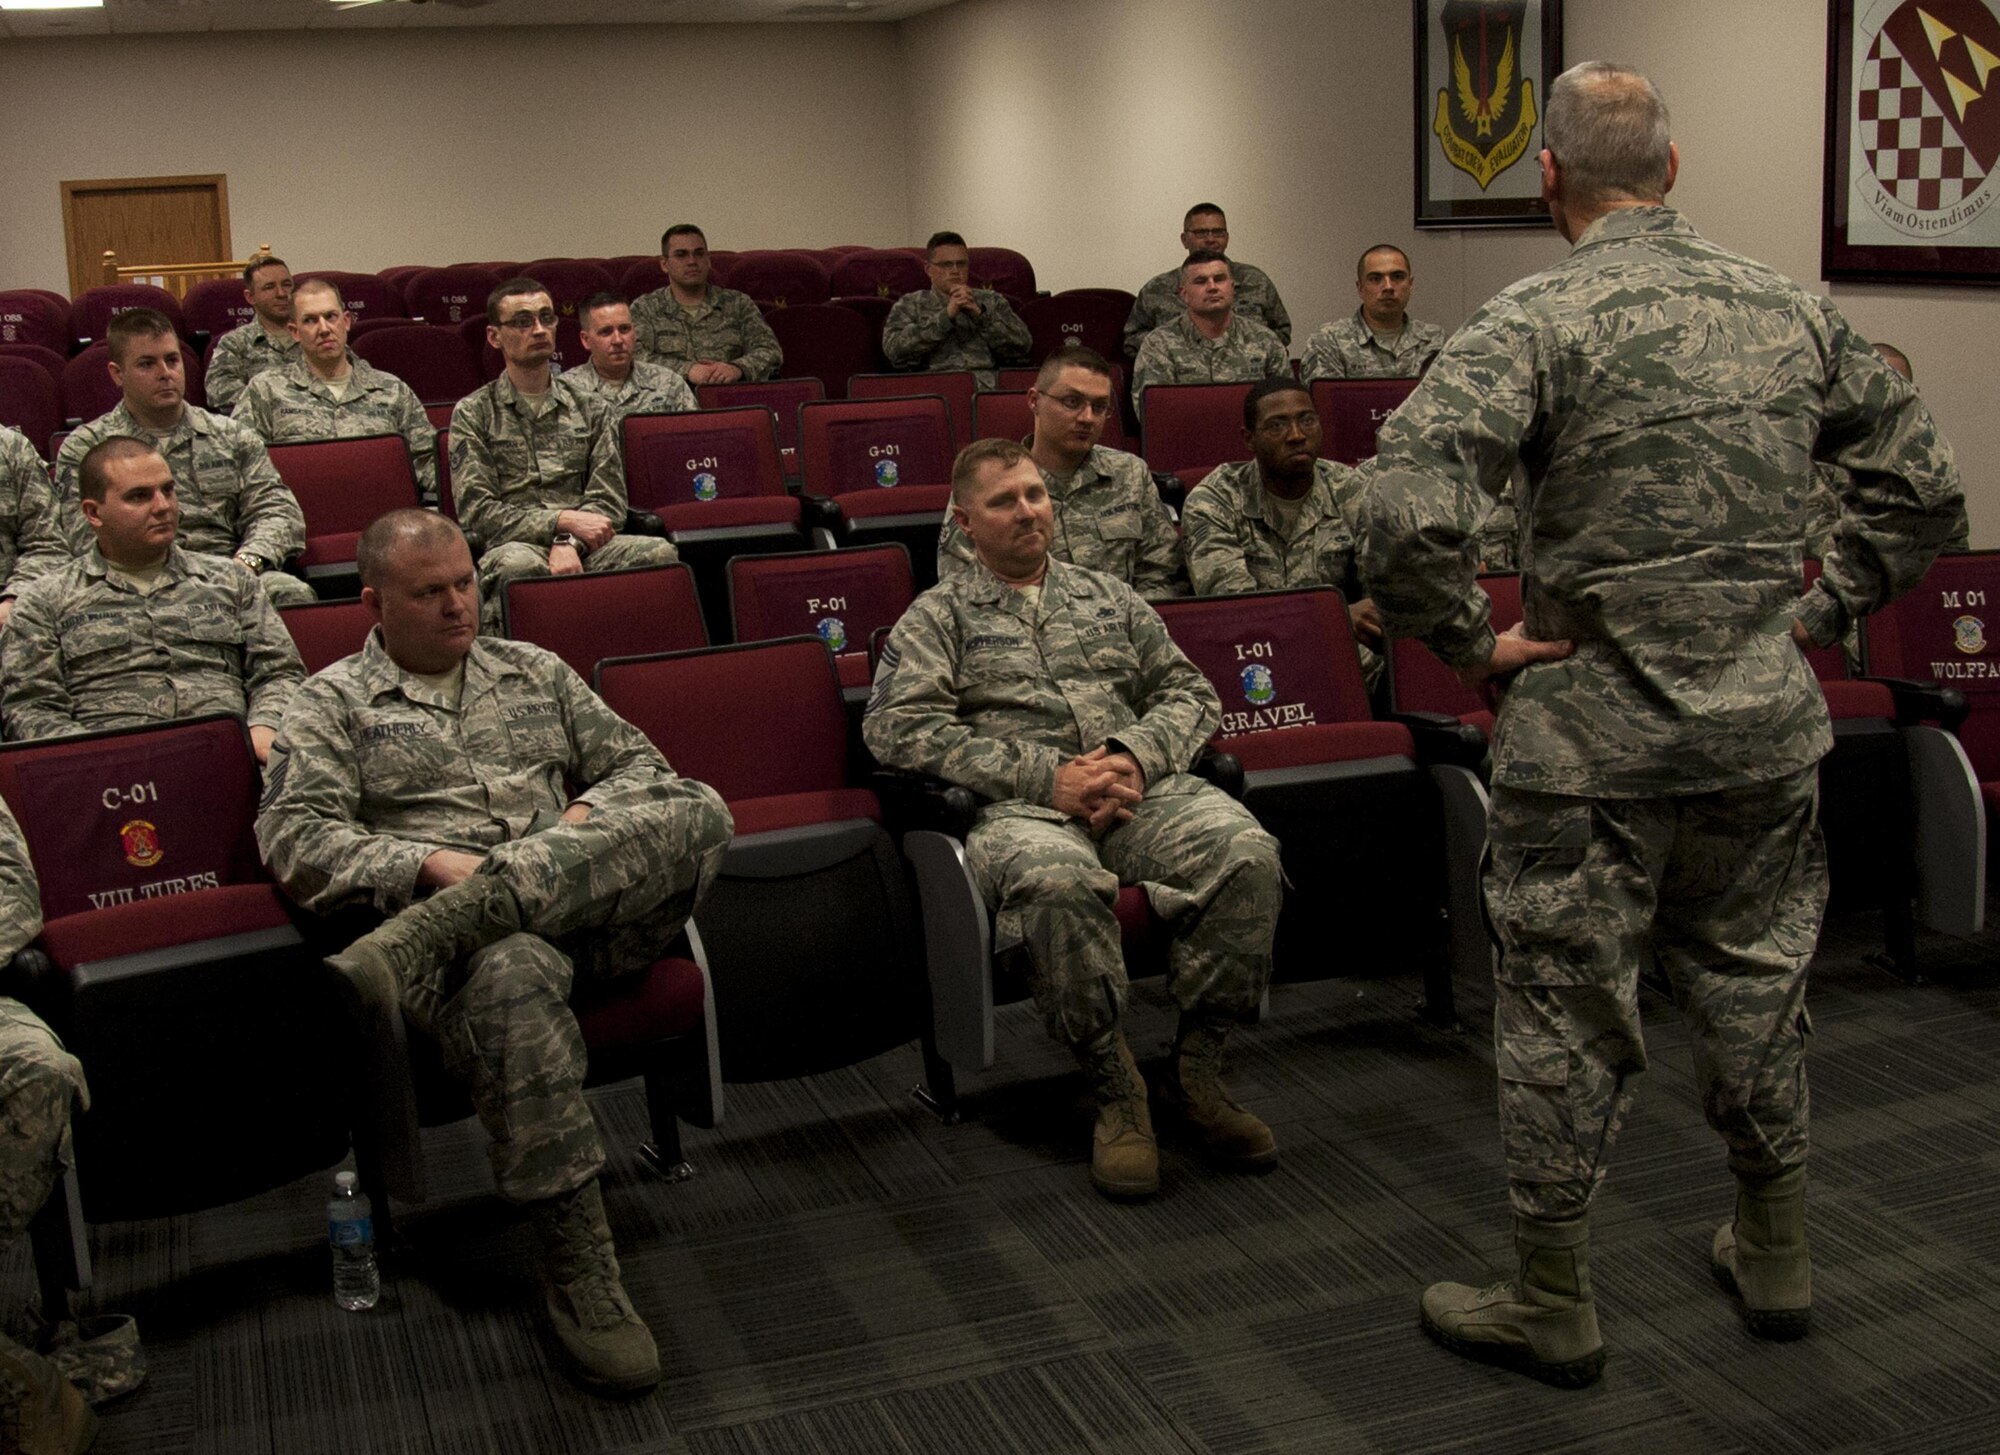 Maj. Gen. Robert D. LaBrutta, Second Air Force commander, speaks to Detachment 23, 373rd Training Squadron Airmen at Minot Air Force Base, N.D., April 18, 2017. LaBrutta visited multiple training facilities during his tour at Minot AFB. (U.S. Air Force photo/Airman 1st Class Alyssa M. Akers)